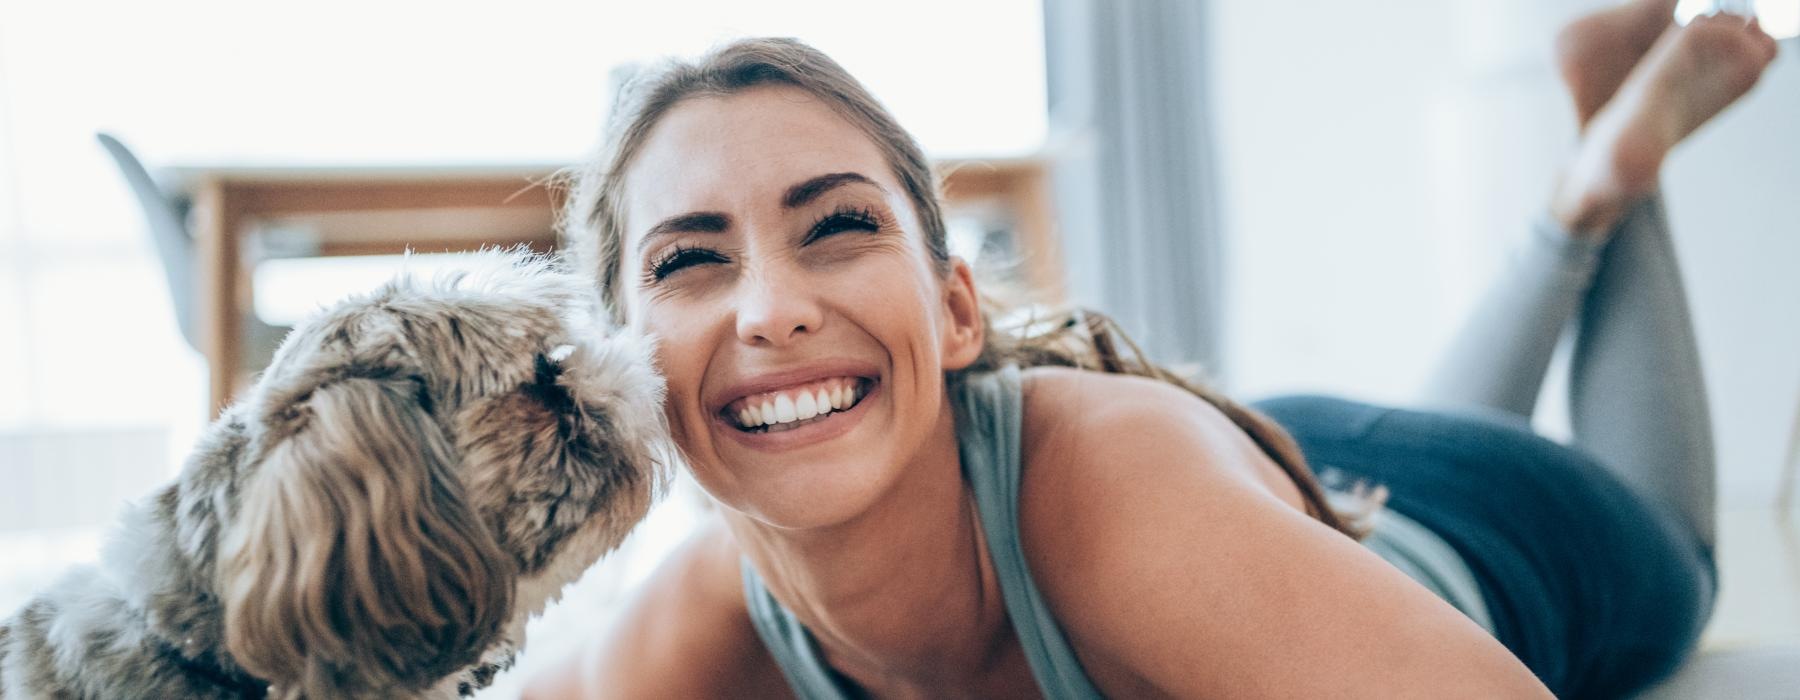 woman smiles as dog kisses her face